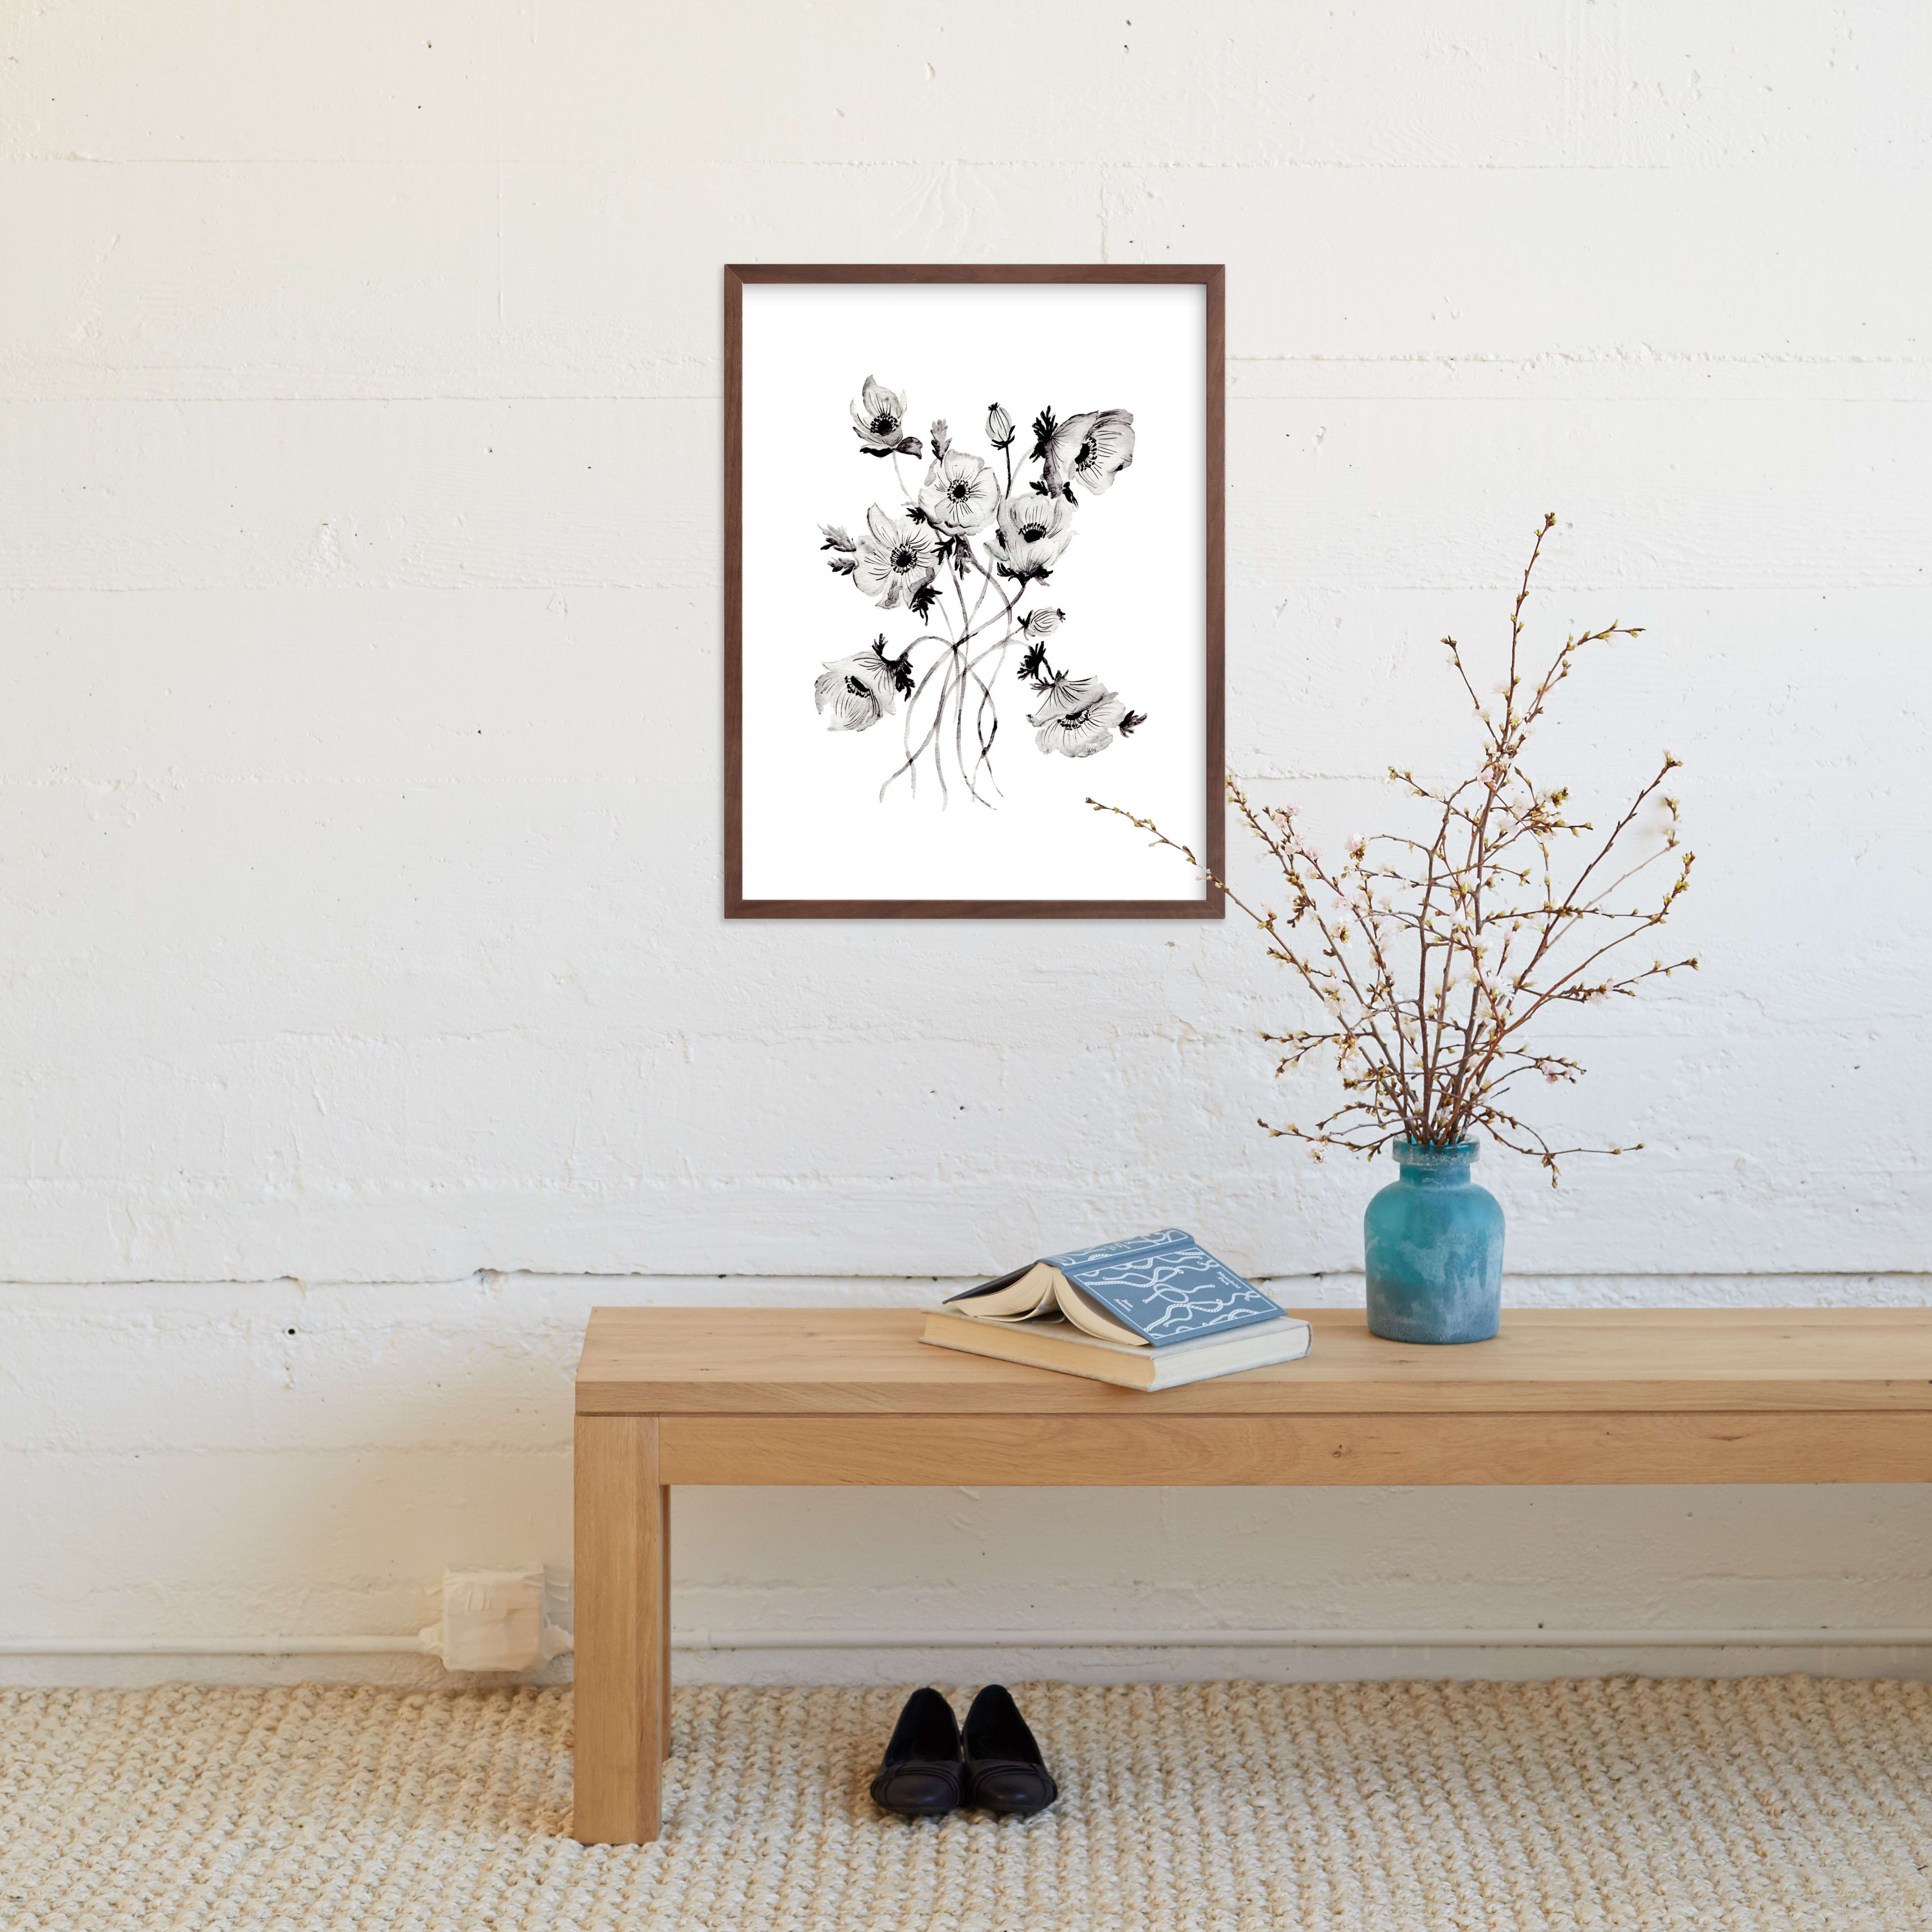 Greyscale Poppies by Shannon Kirsten, Art Print, Walnut Frame, 18" x 24" - Image 1